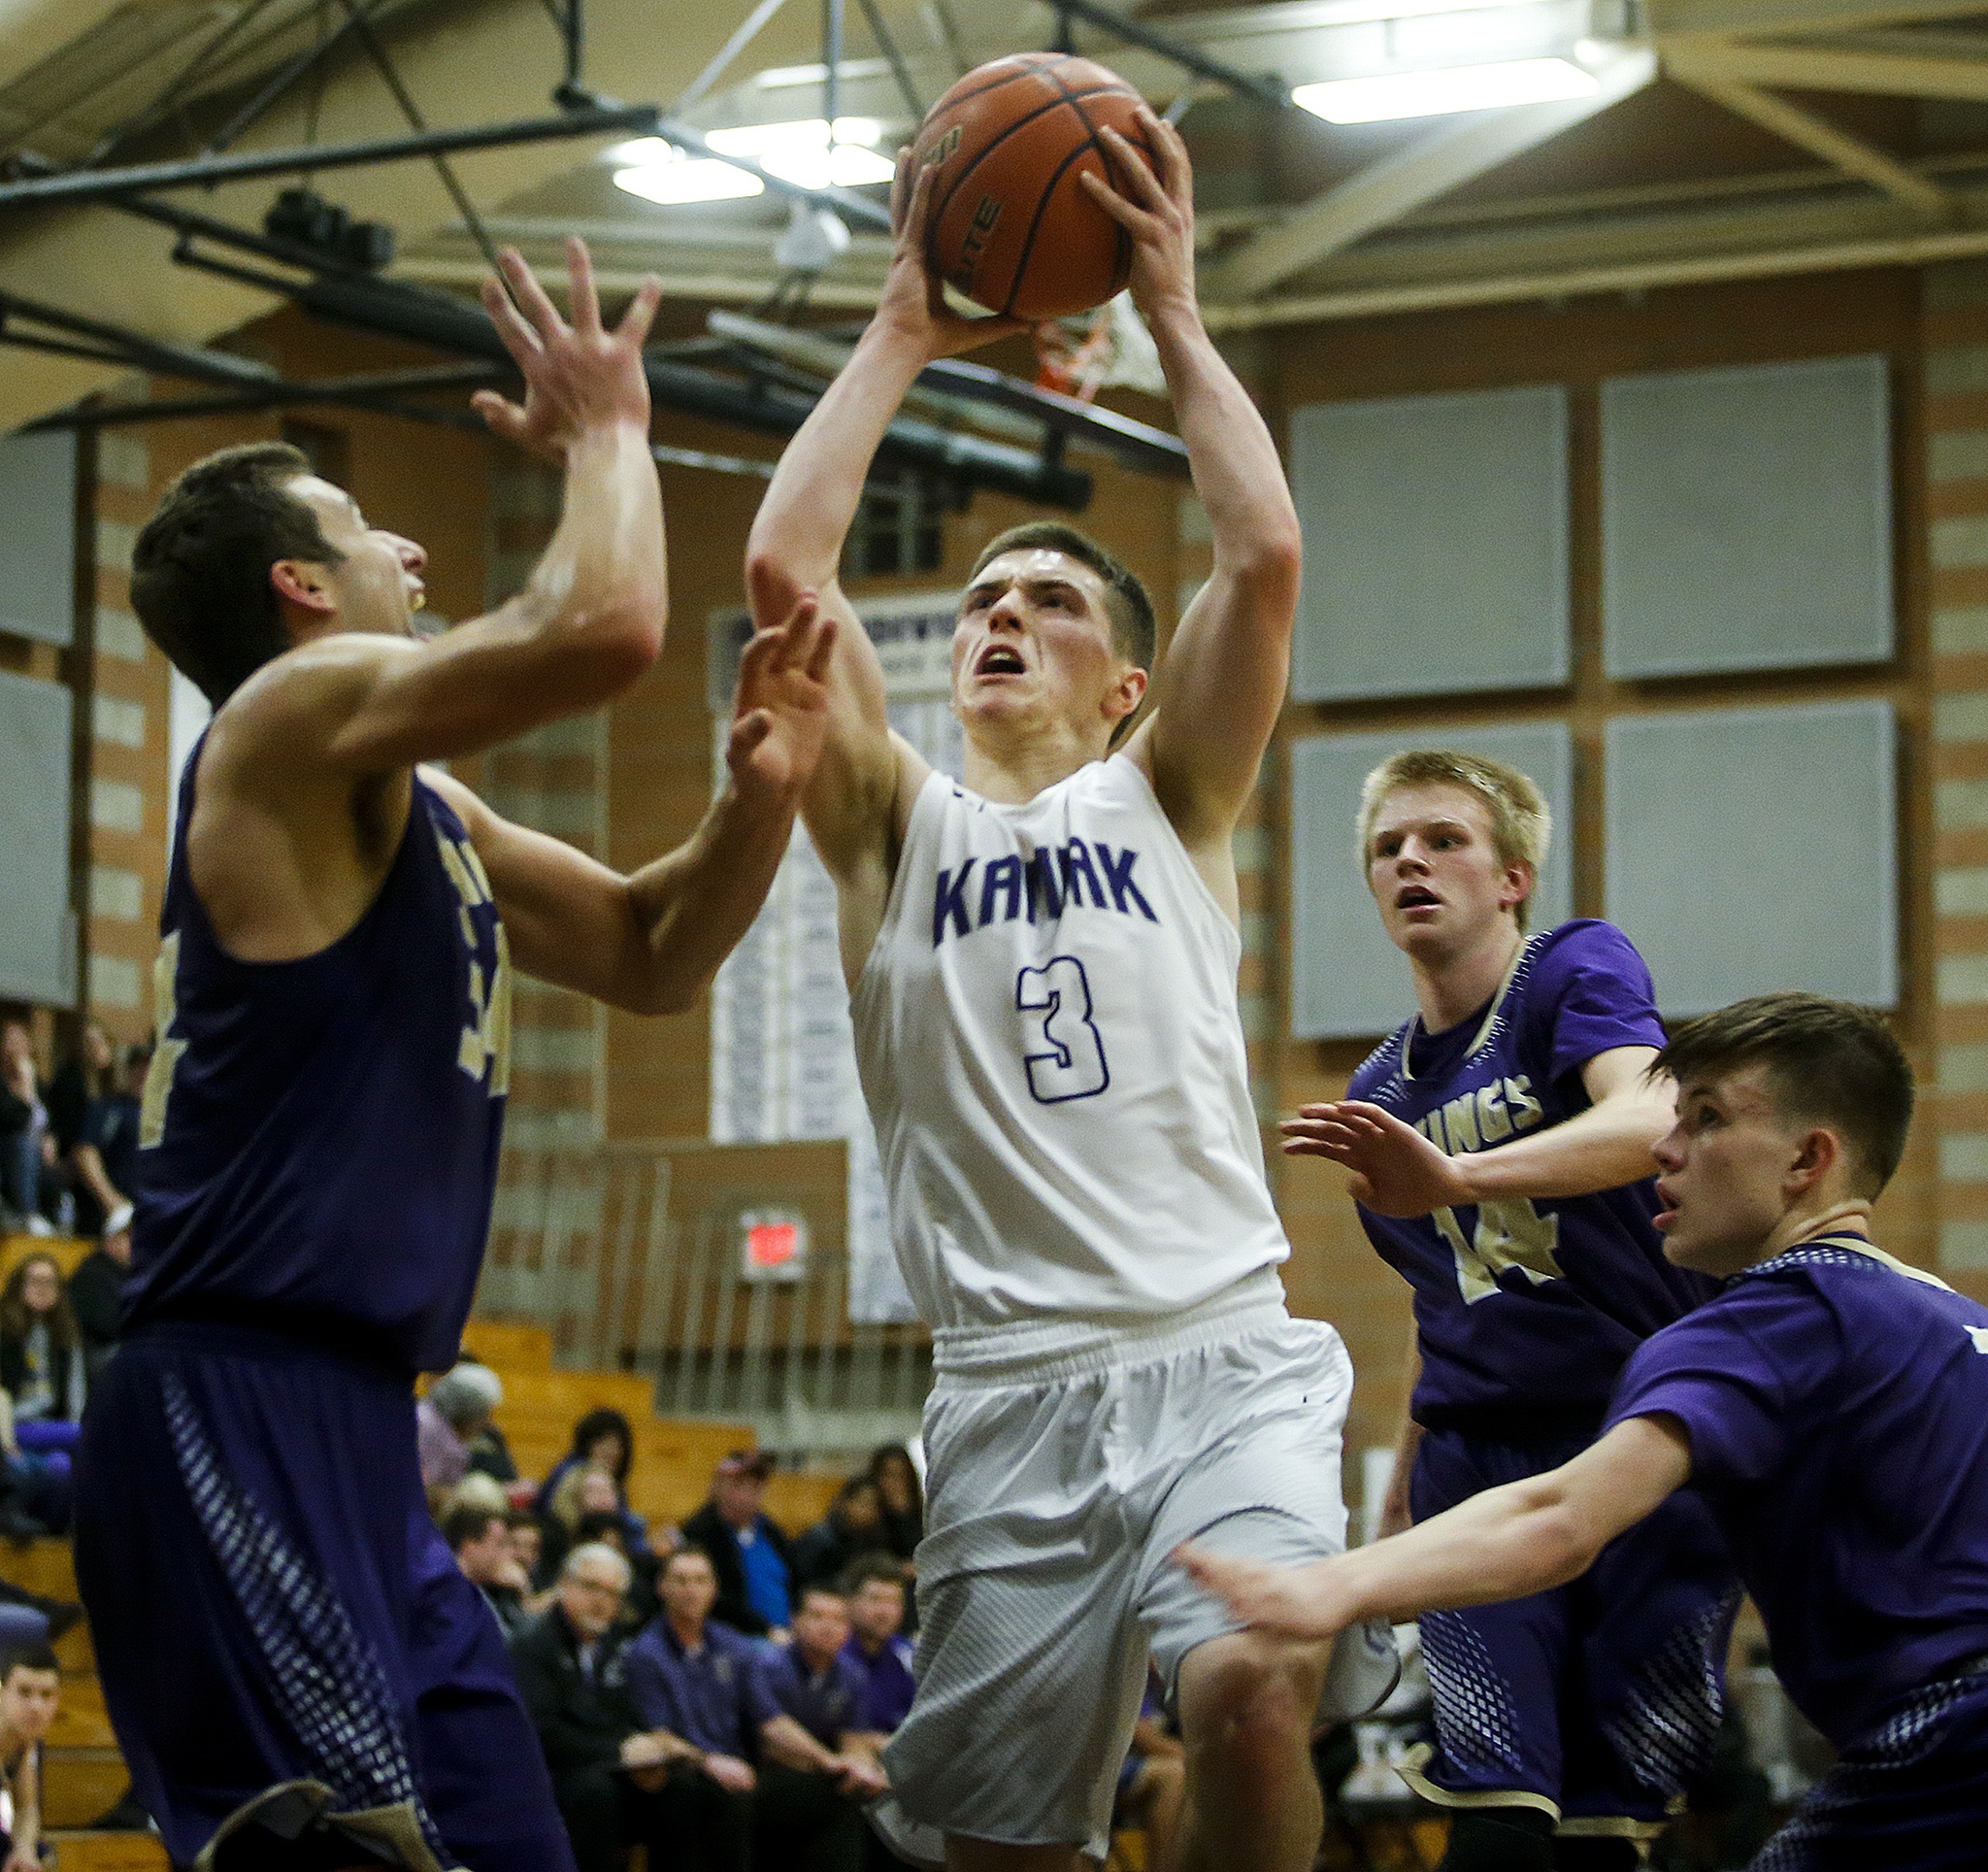 Kamiak’s Carson Tuttle (3) weaves through Lake Stevens defenders during a game Tuesday in Mukilteo. (Ian Terry / The Herald)